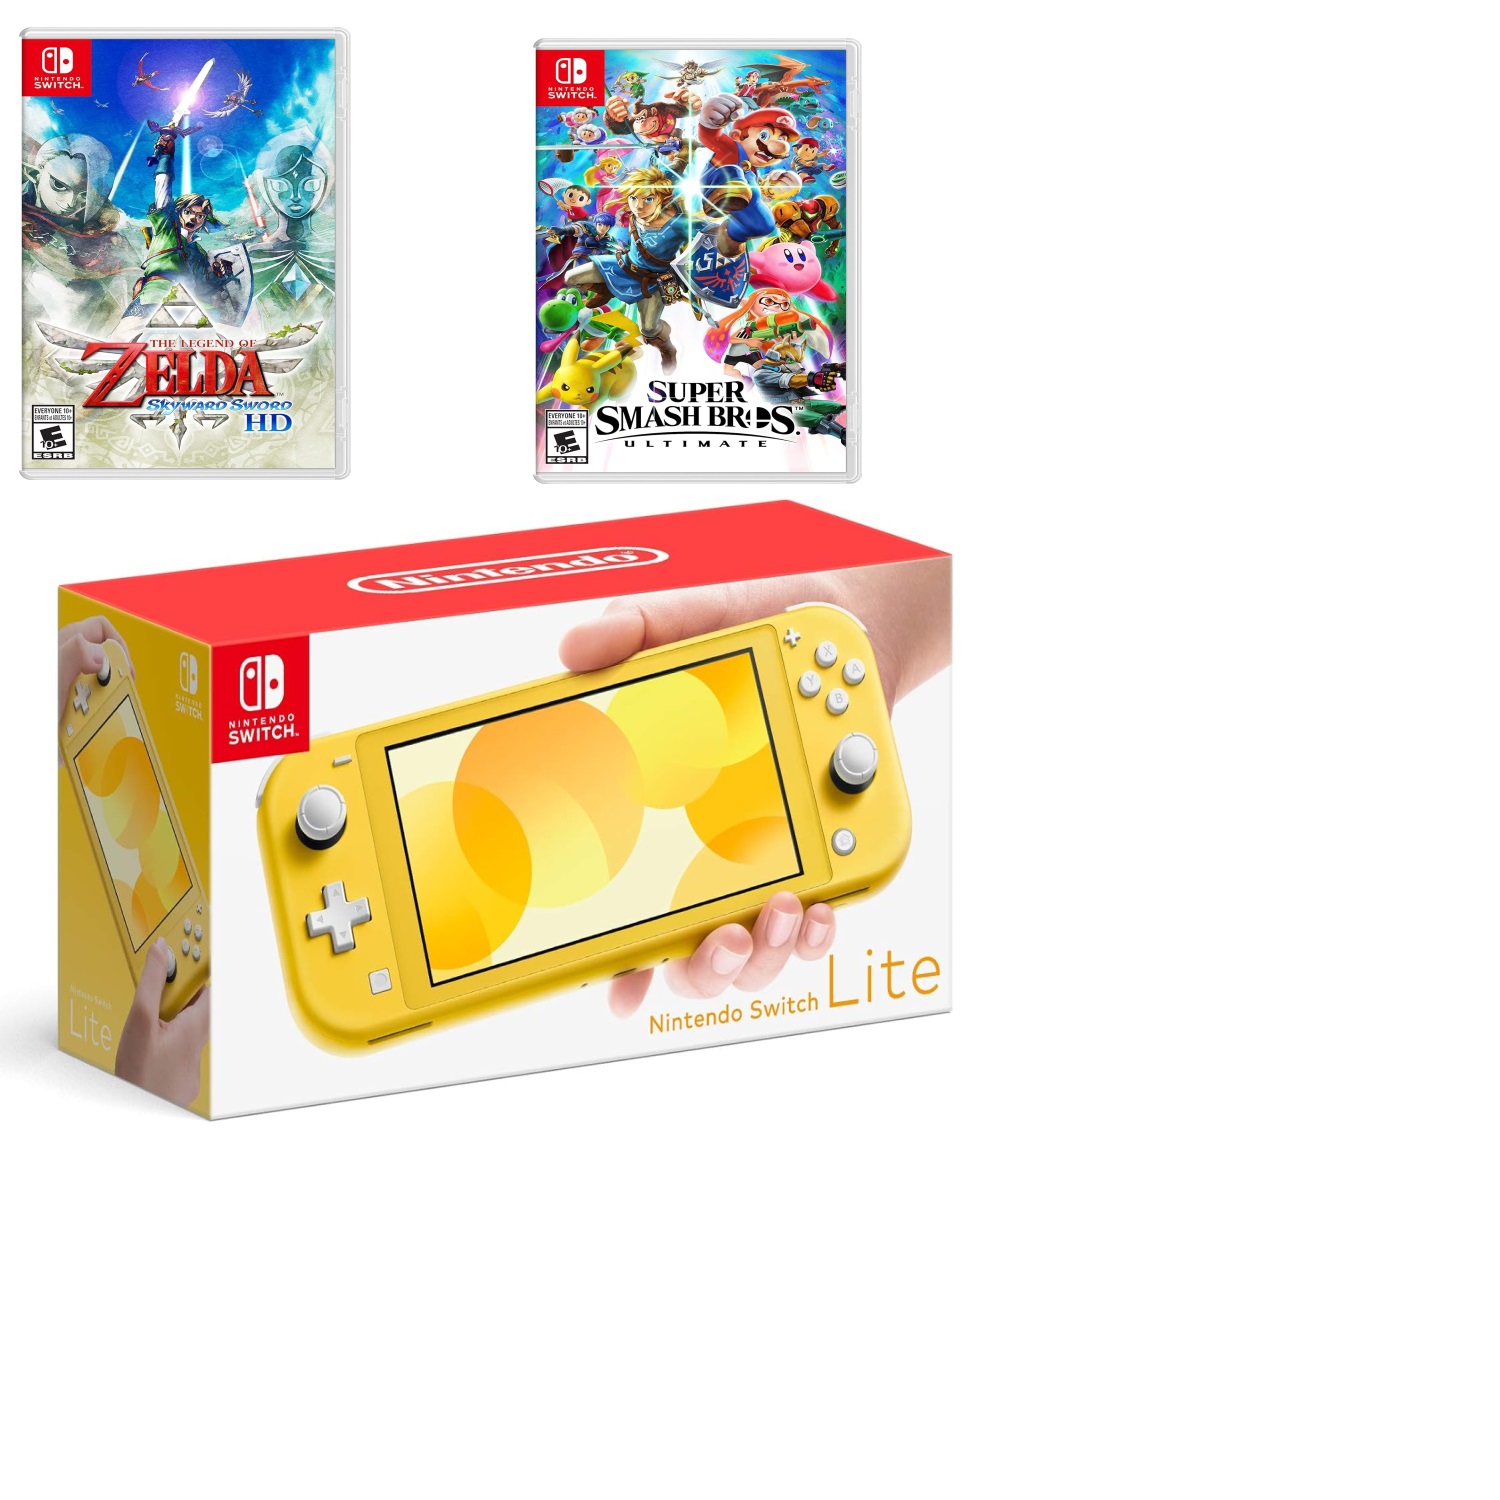 Nintendo Switch Lite Console - Yellow (Japan Spec) bundled with Super Smash Bros Ultimate game and Legend of Zelda: Skyward Sword HD – Nintendo Switch game